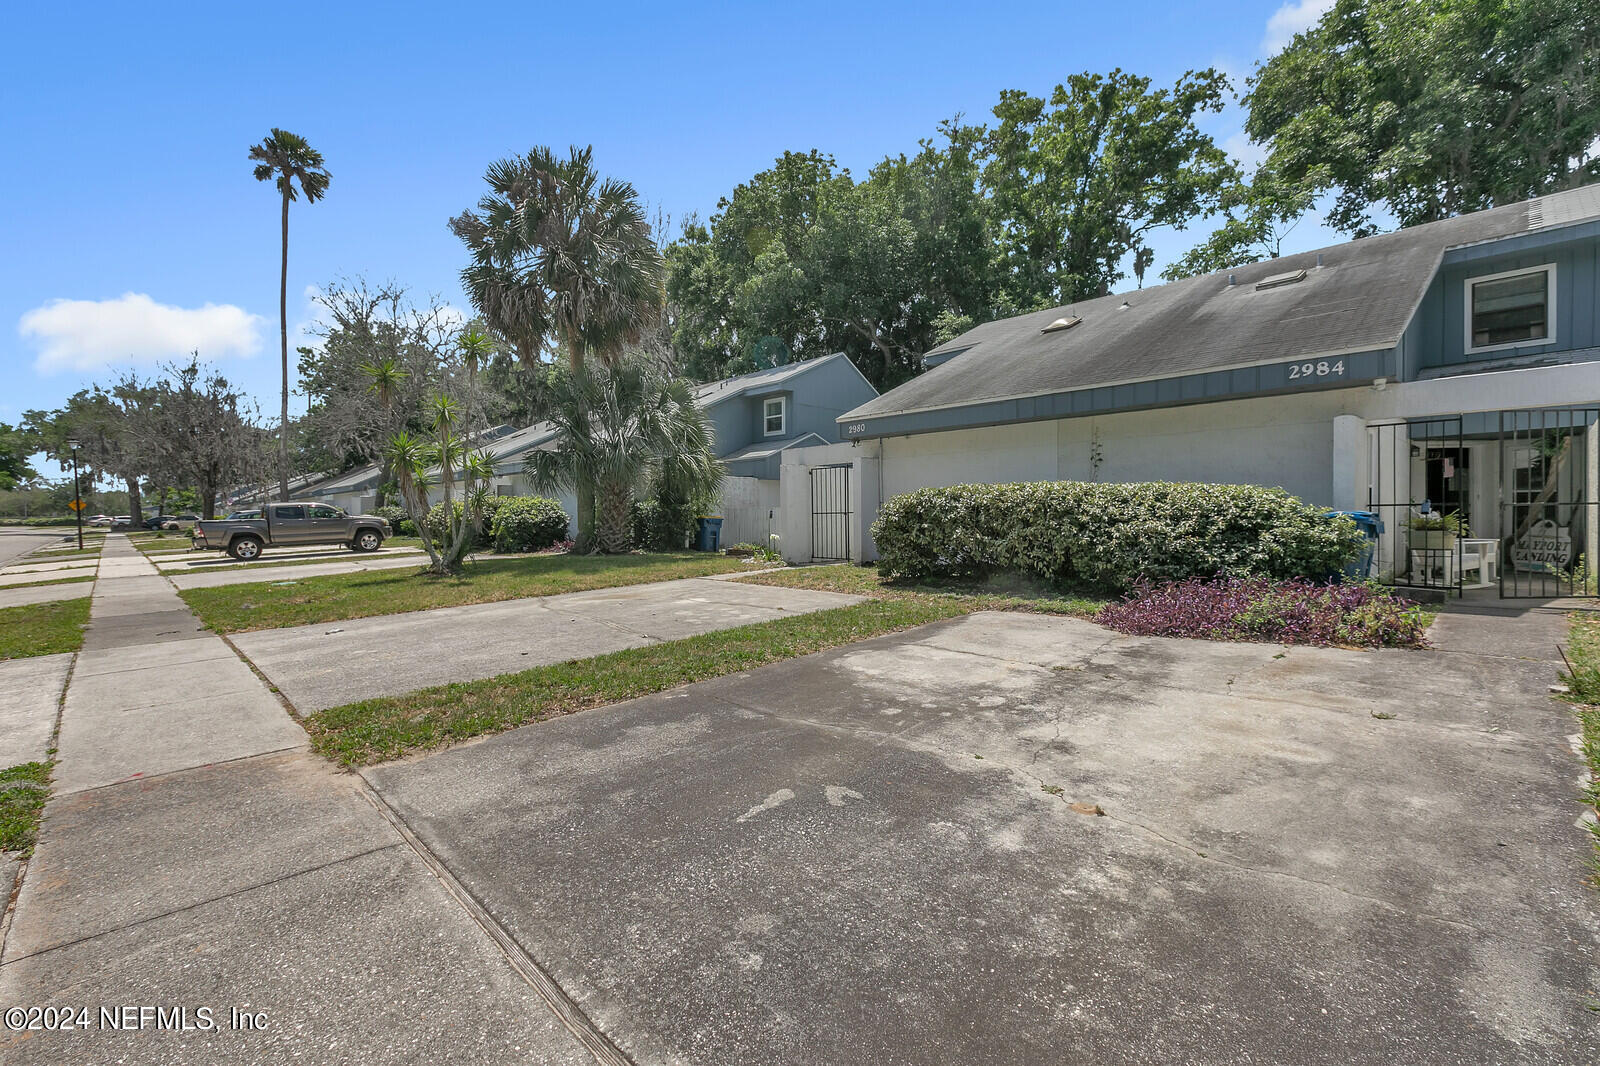 Jacksonville, FL home for sale located at 2984 Songbird Drive, Jacksonville, FL 32233